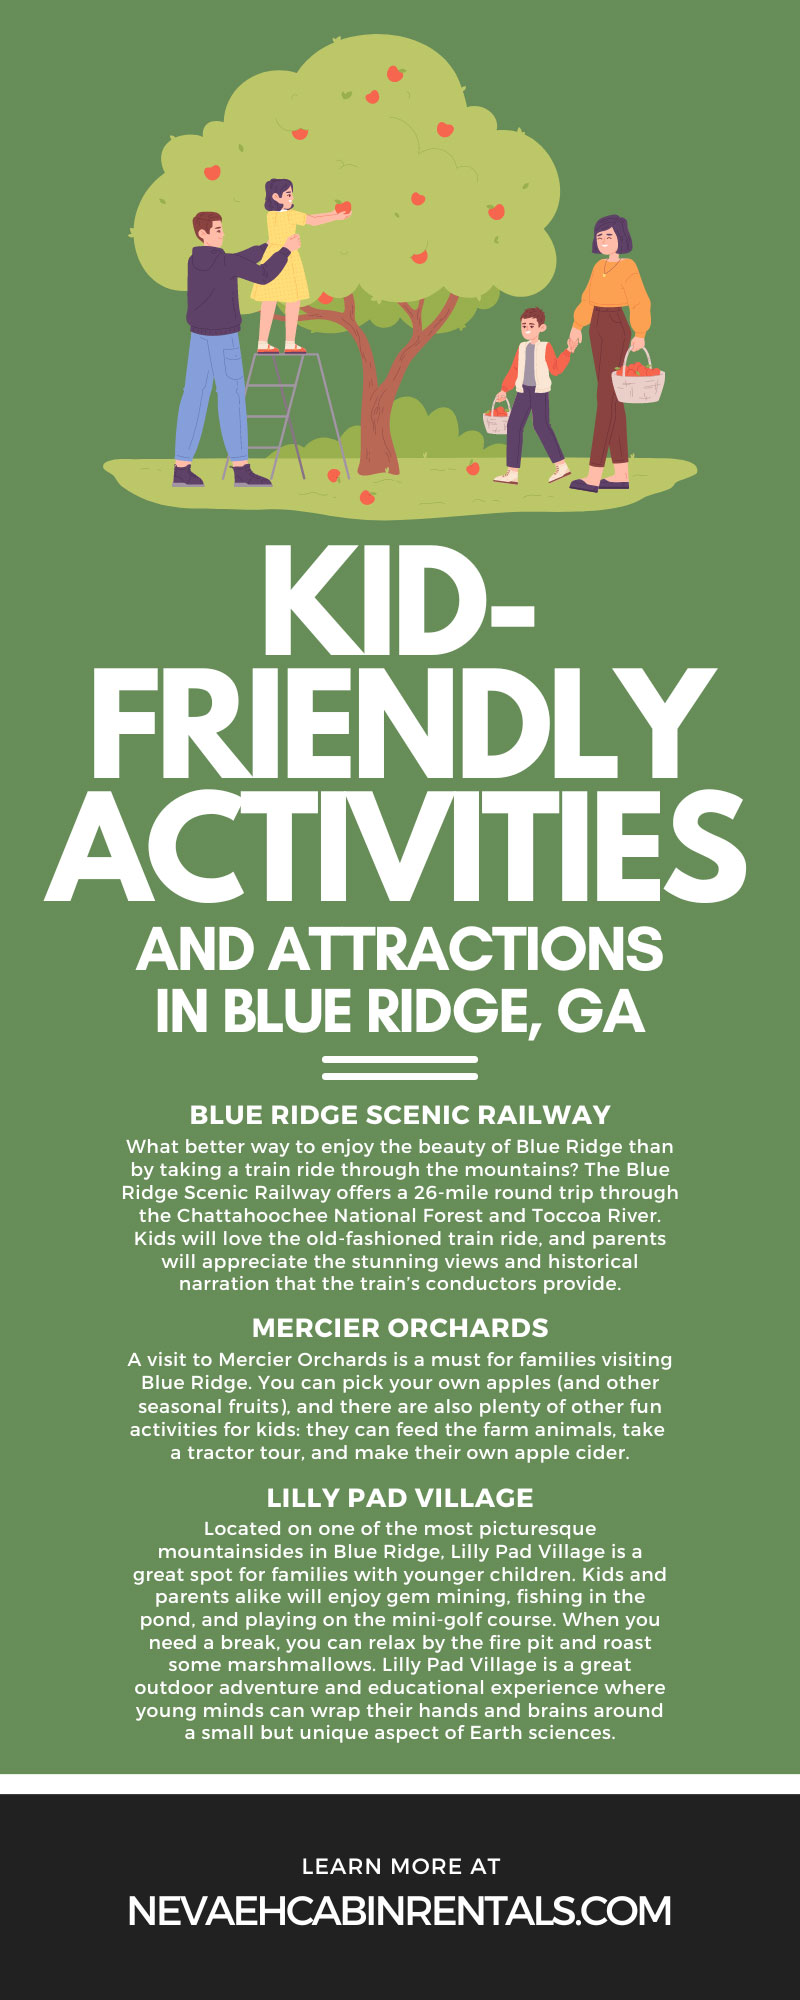 Kid-Friendly Activities and Attractions in Blue Ridge, GA